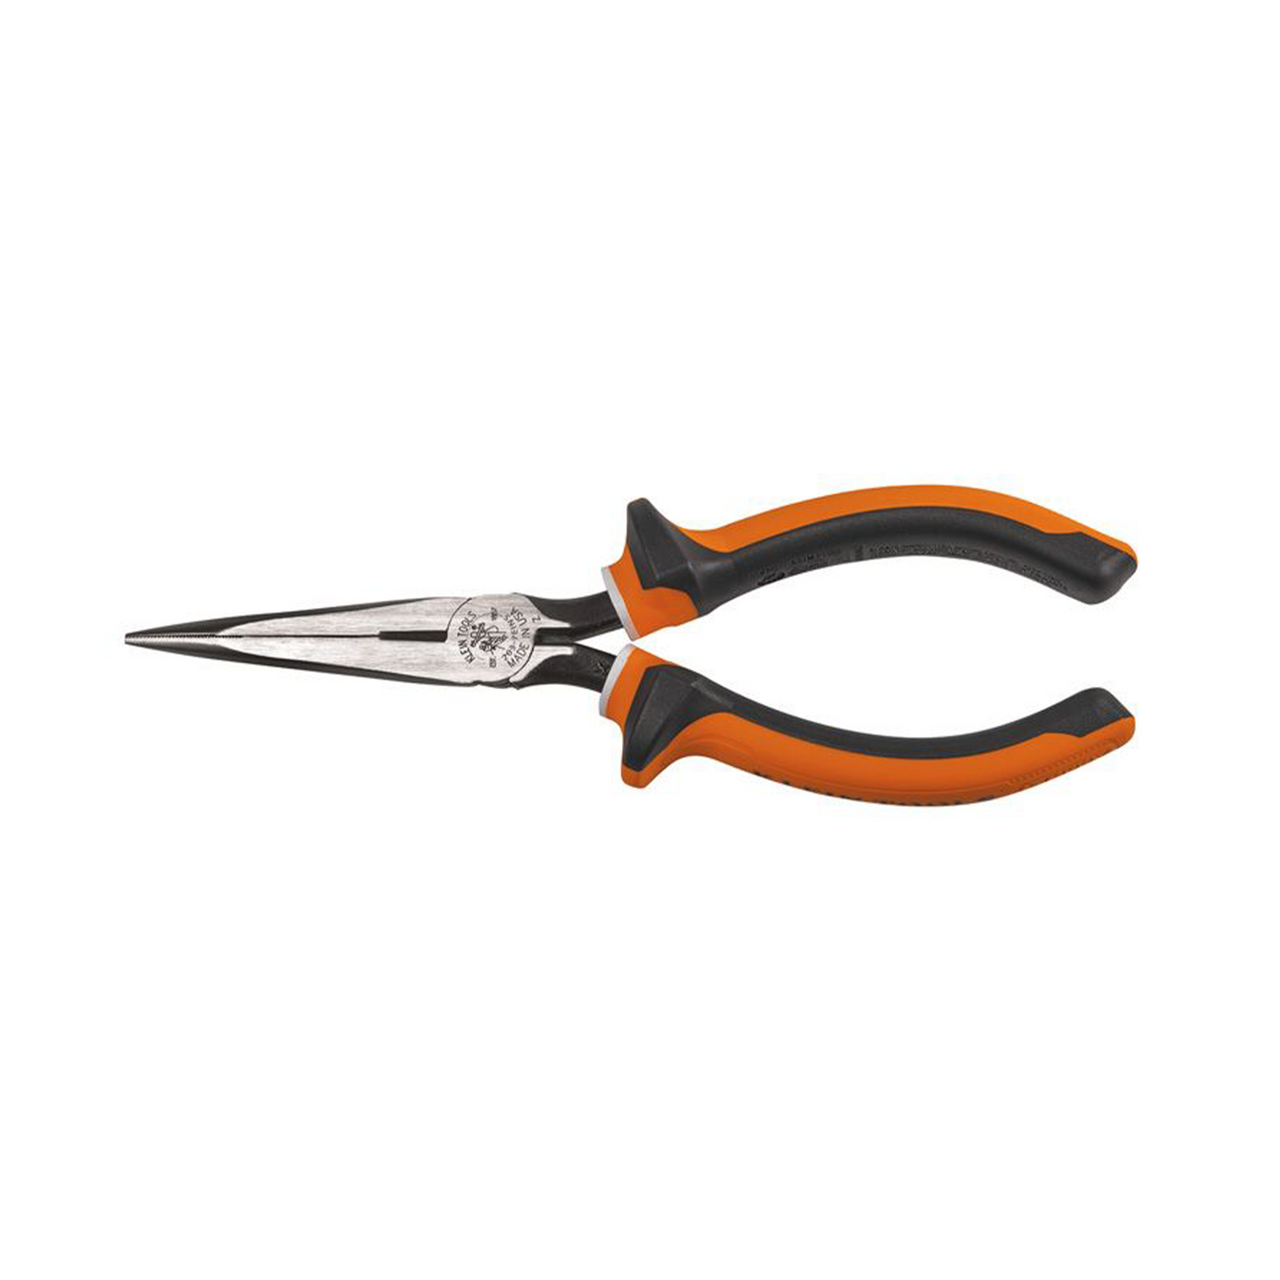 Pliers, Needle Nose Side-Cutters, 7-Inch - D203-7